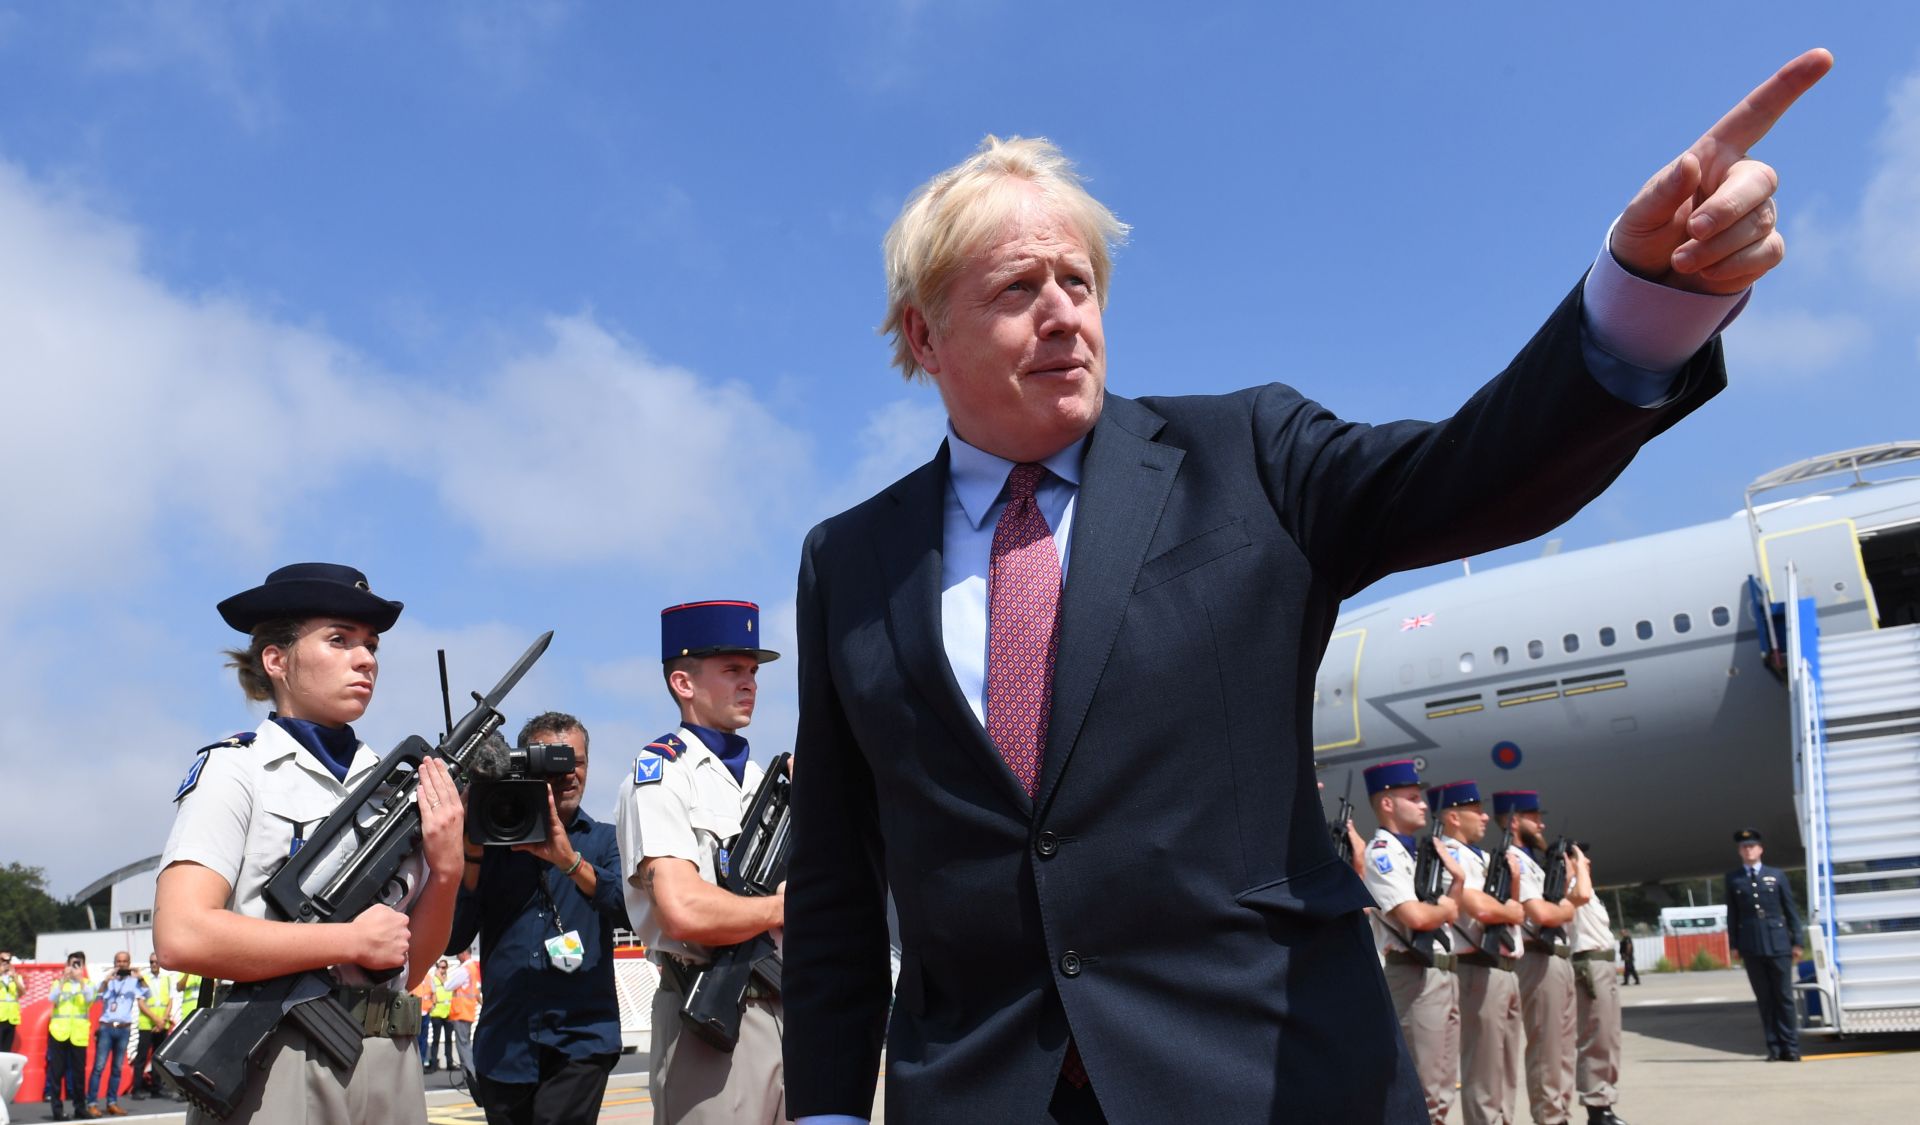 epa07790234 Britain's Prime Minister Boris Johnson (C) arrives at Biarritz Pays Basque Airport in Biarritz to attend the G7 summit, France, 24 August 2019. The G7 Summit runs from 24 to 26 August in Biarritz.  EPA/STEFAN ROUSSEAU / POOL